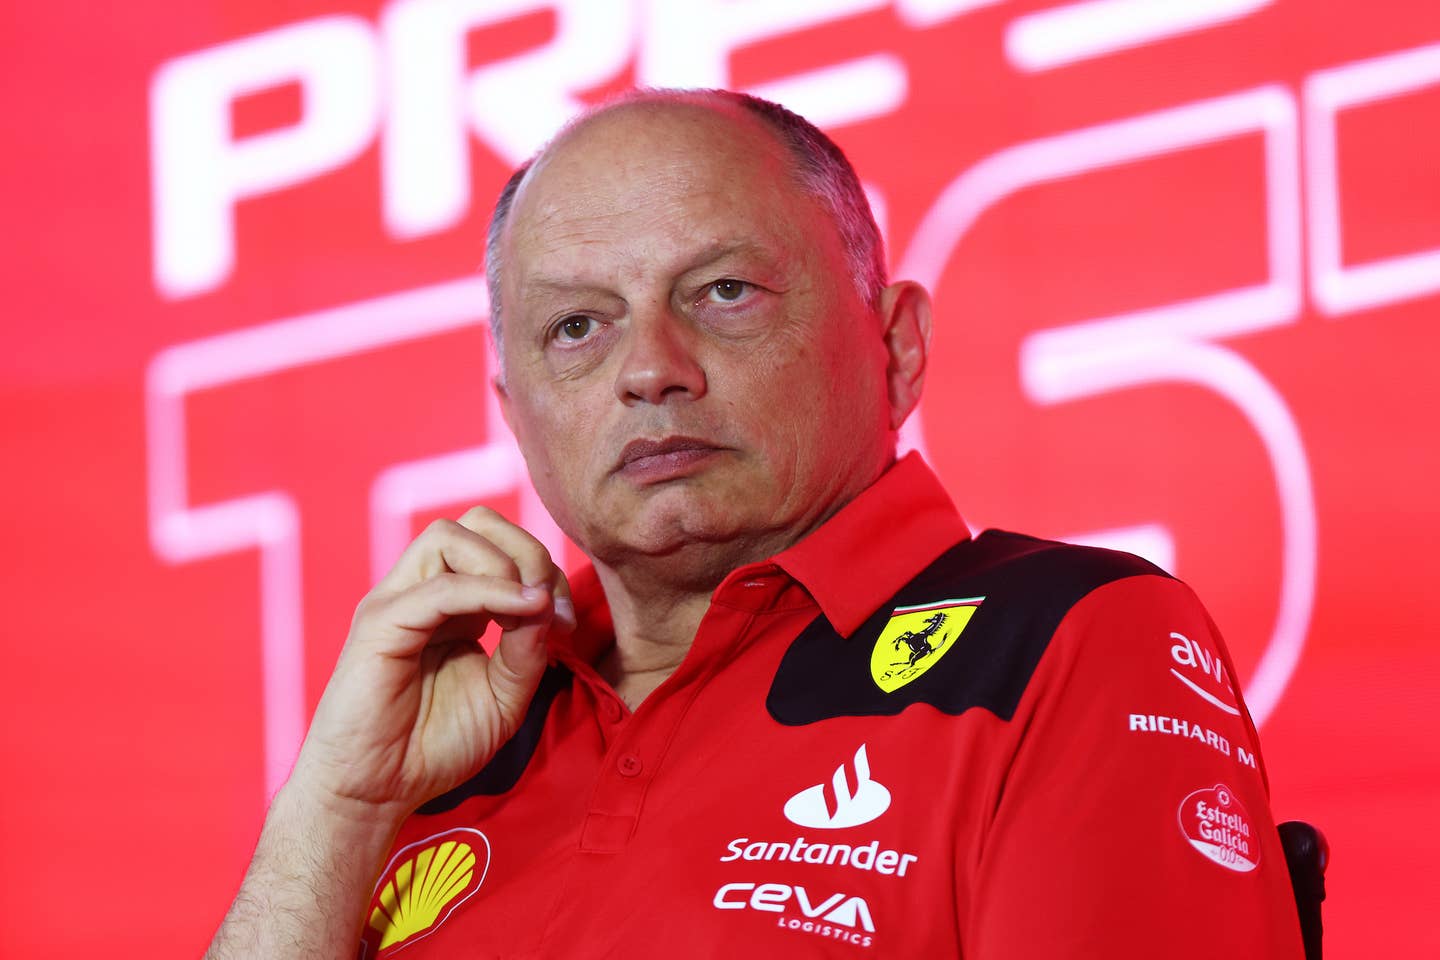 BAHRAIN, BAHRAIN - FEBRUARY 23: Ferrari Team Principal Frederic Vasseur looks on in the Team Principals Press Conference during day one of F1 Testing at Bahrain International Circuit on February 23, 2023 in Bahrain, Bahrain. (Photo by Dan Istitene/Getty Images)